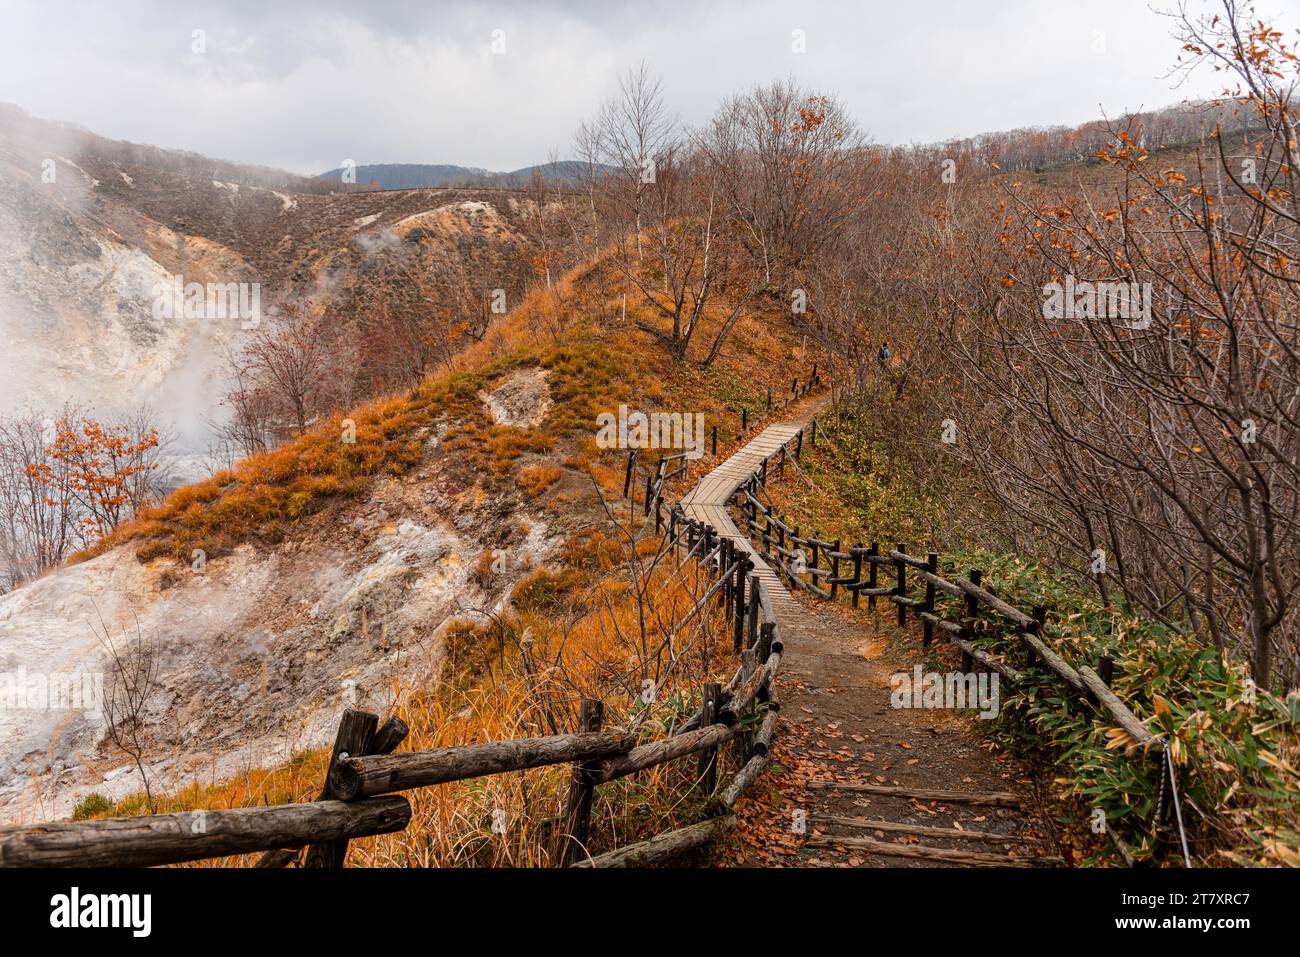 Walking path leading through autumal forest with steaming volcanic valley of Noboribetsu on the left, Hokkaido, Japan, Asia Stock Photo